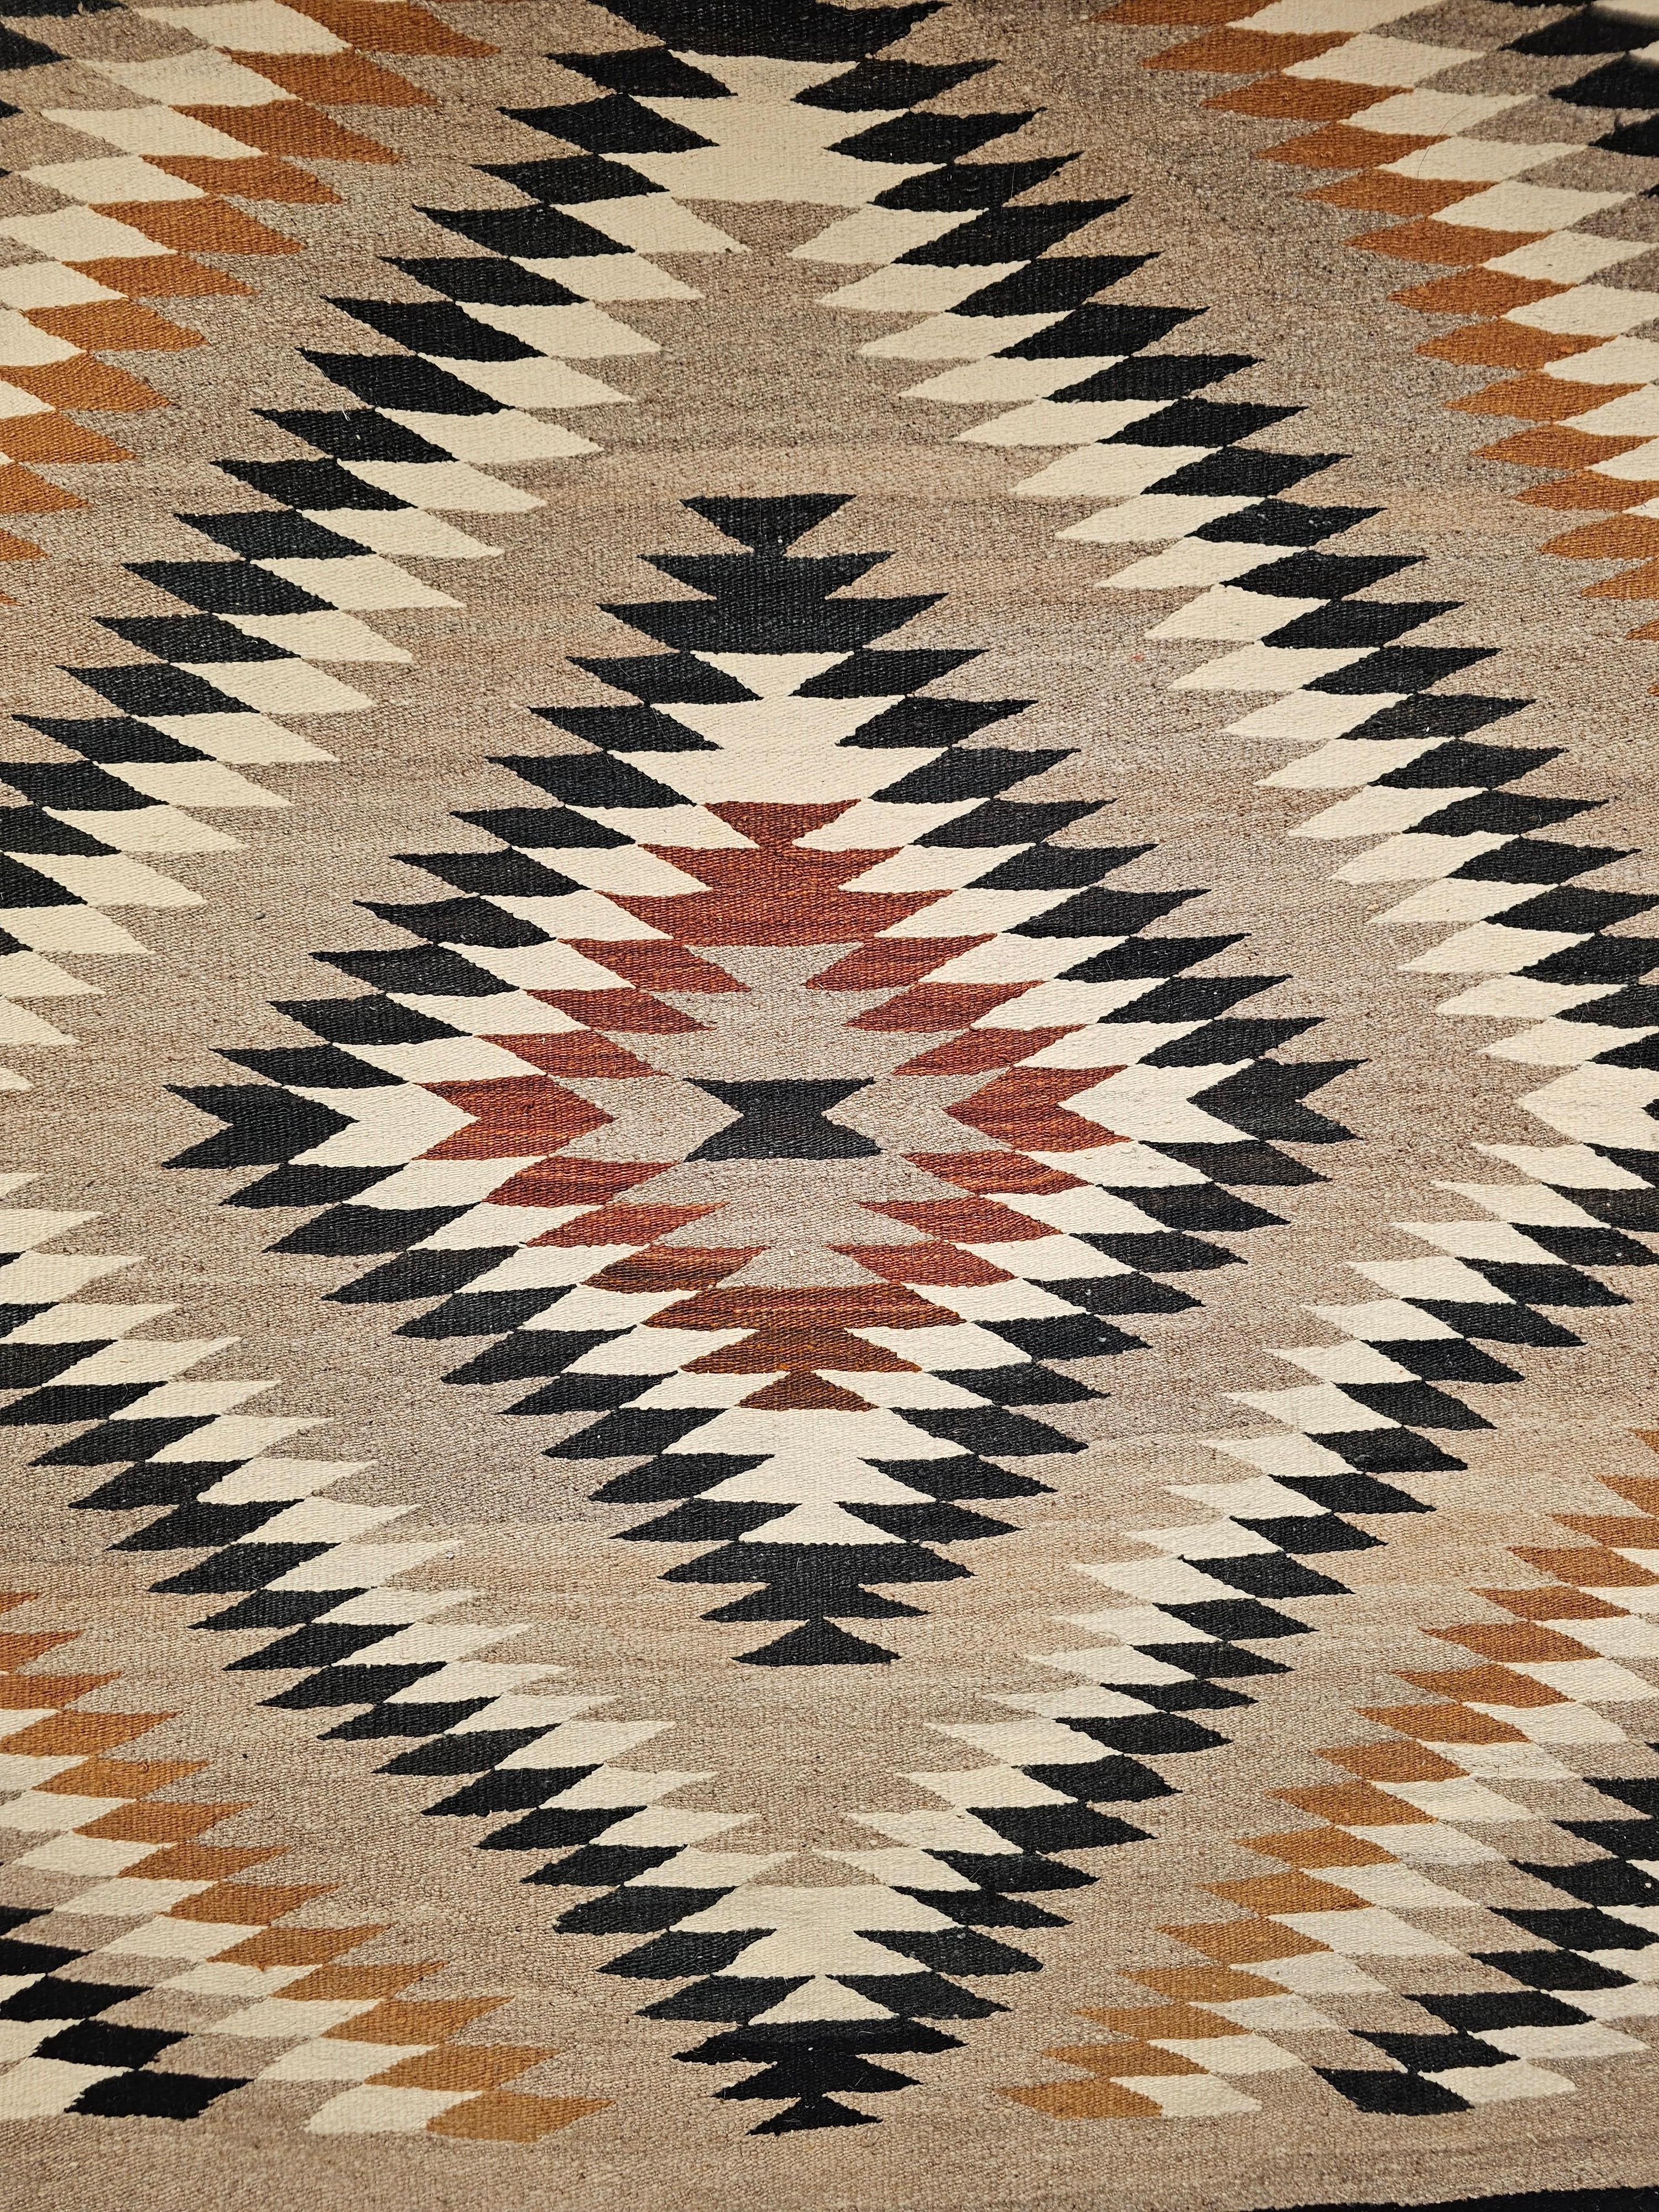 Vintage Native American Navajo rug is in an “Eye Dazzler” pattern from the mid 1900s. The natural colors in this Navajo rug are in beautiful earth tones including brown, black, and grey. Navajo weavers use natural organic dyes that are available